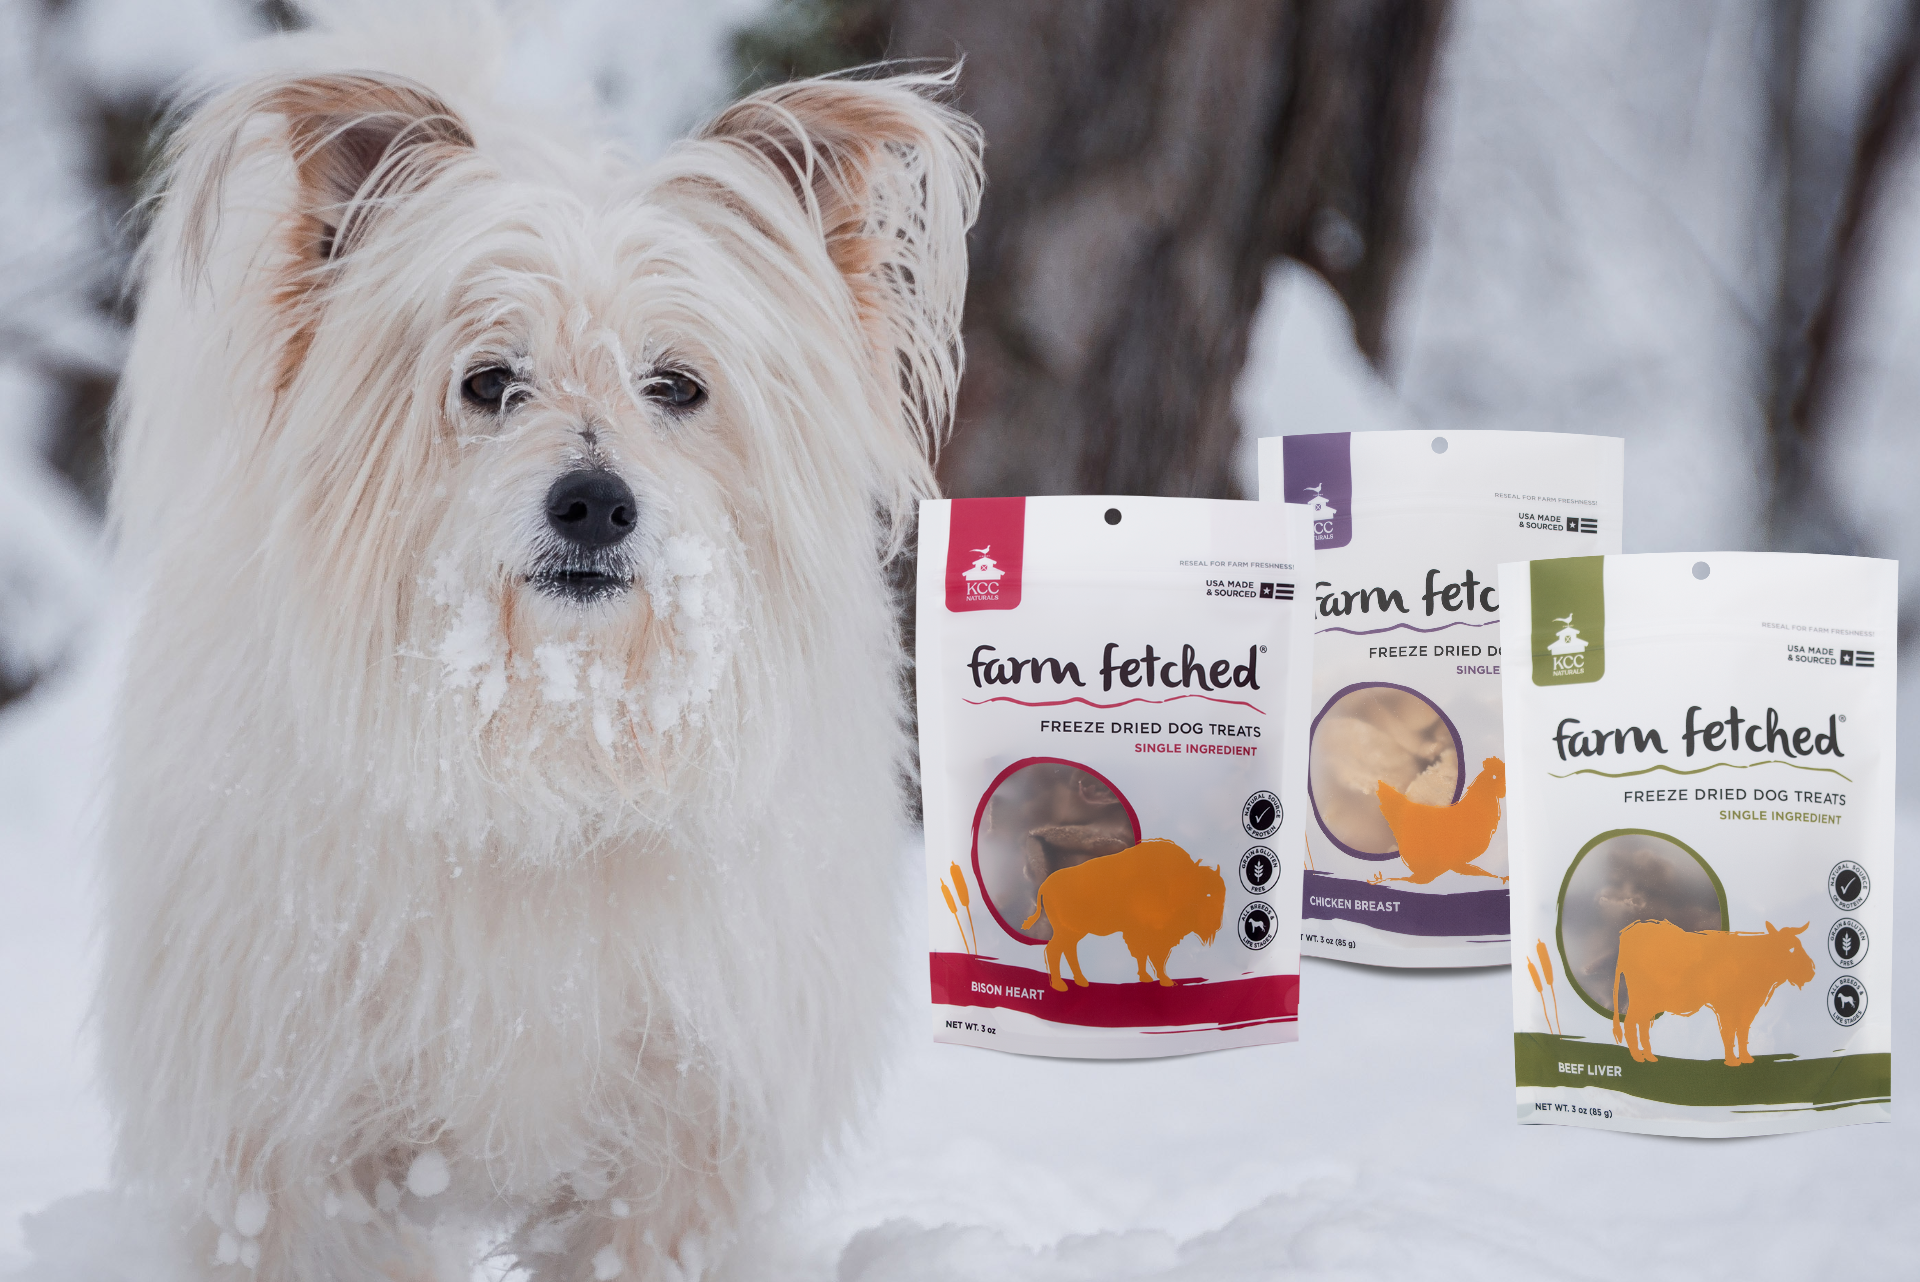 dog in snow with freeze-dried bison heart, chicken breast and beef liver flavored treat packages